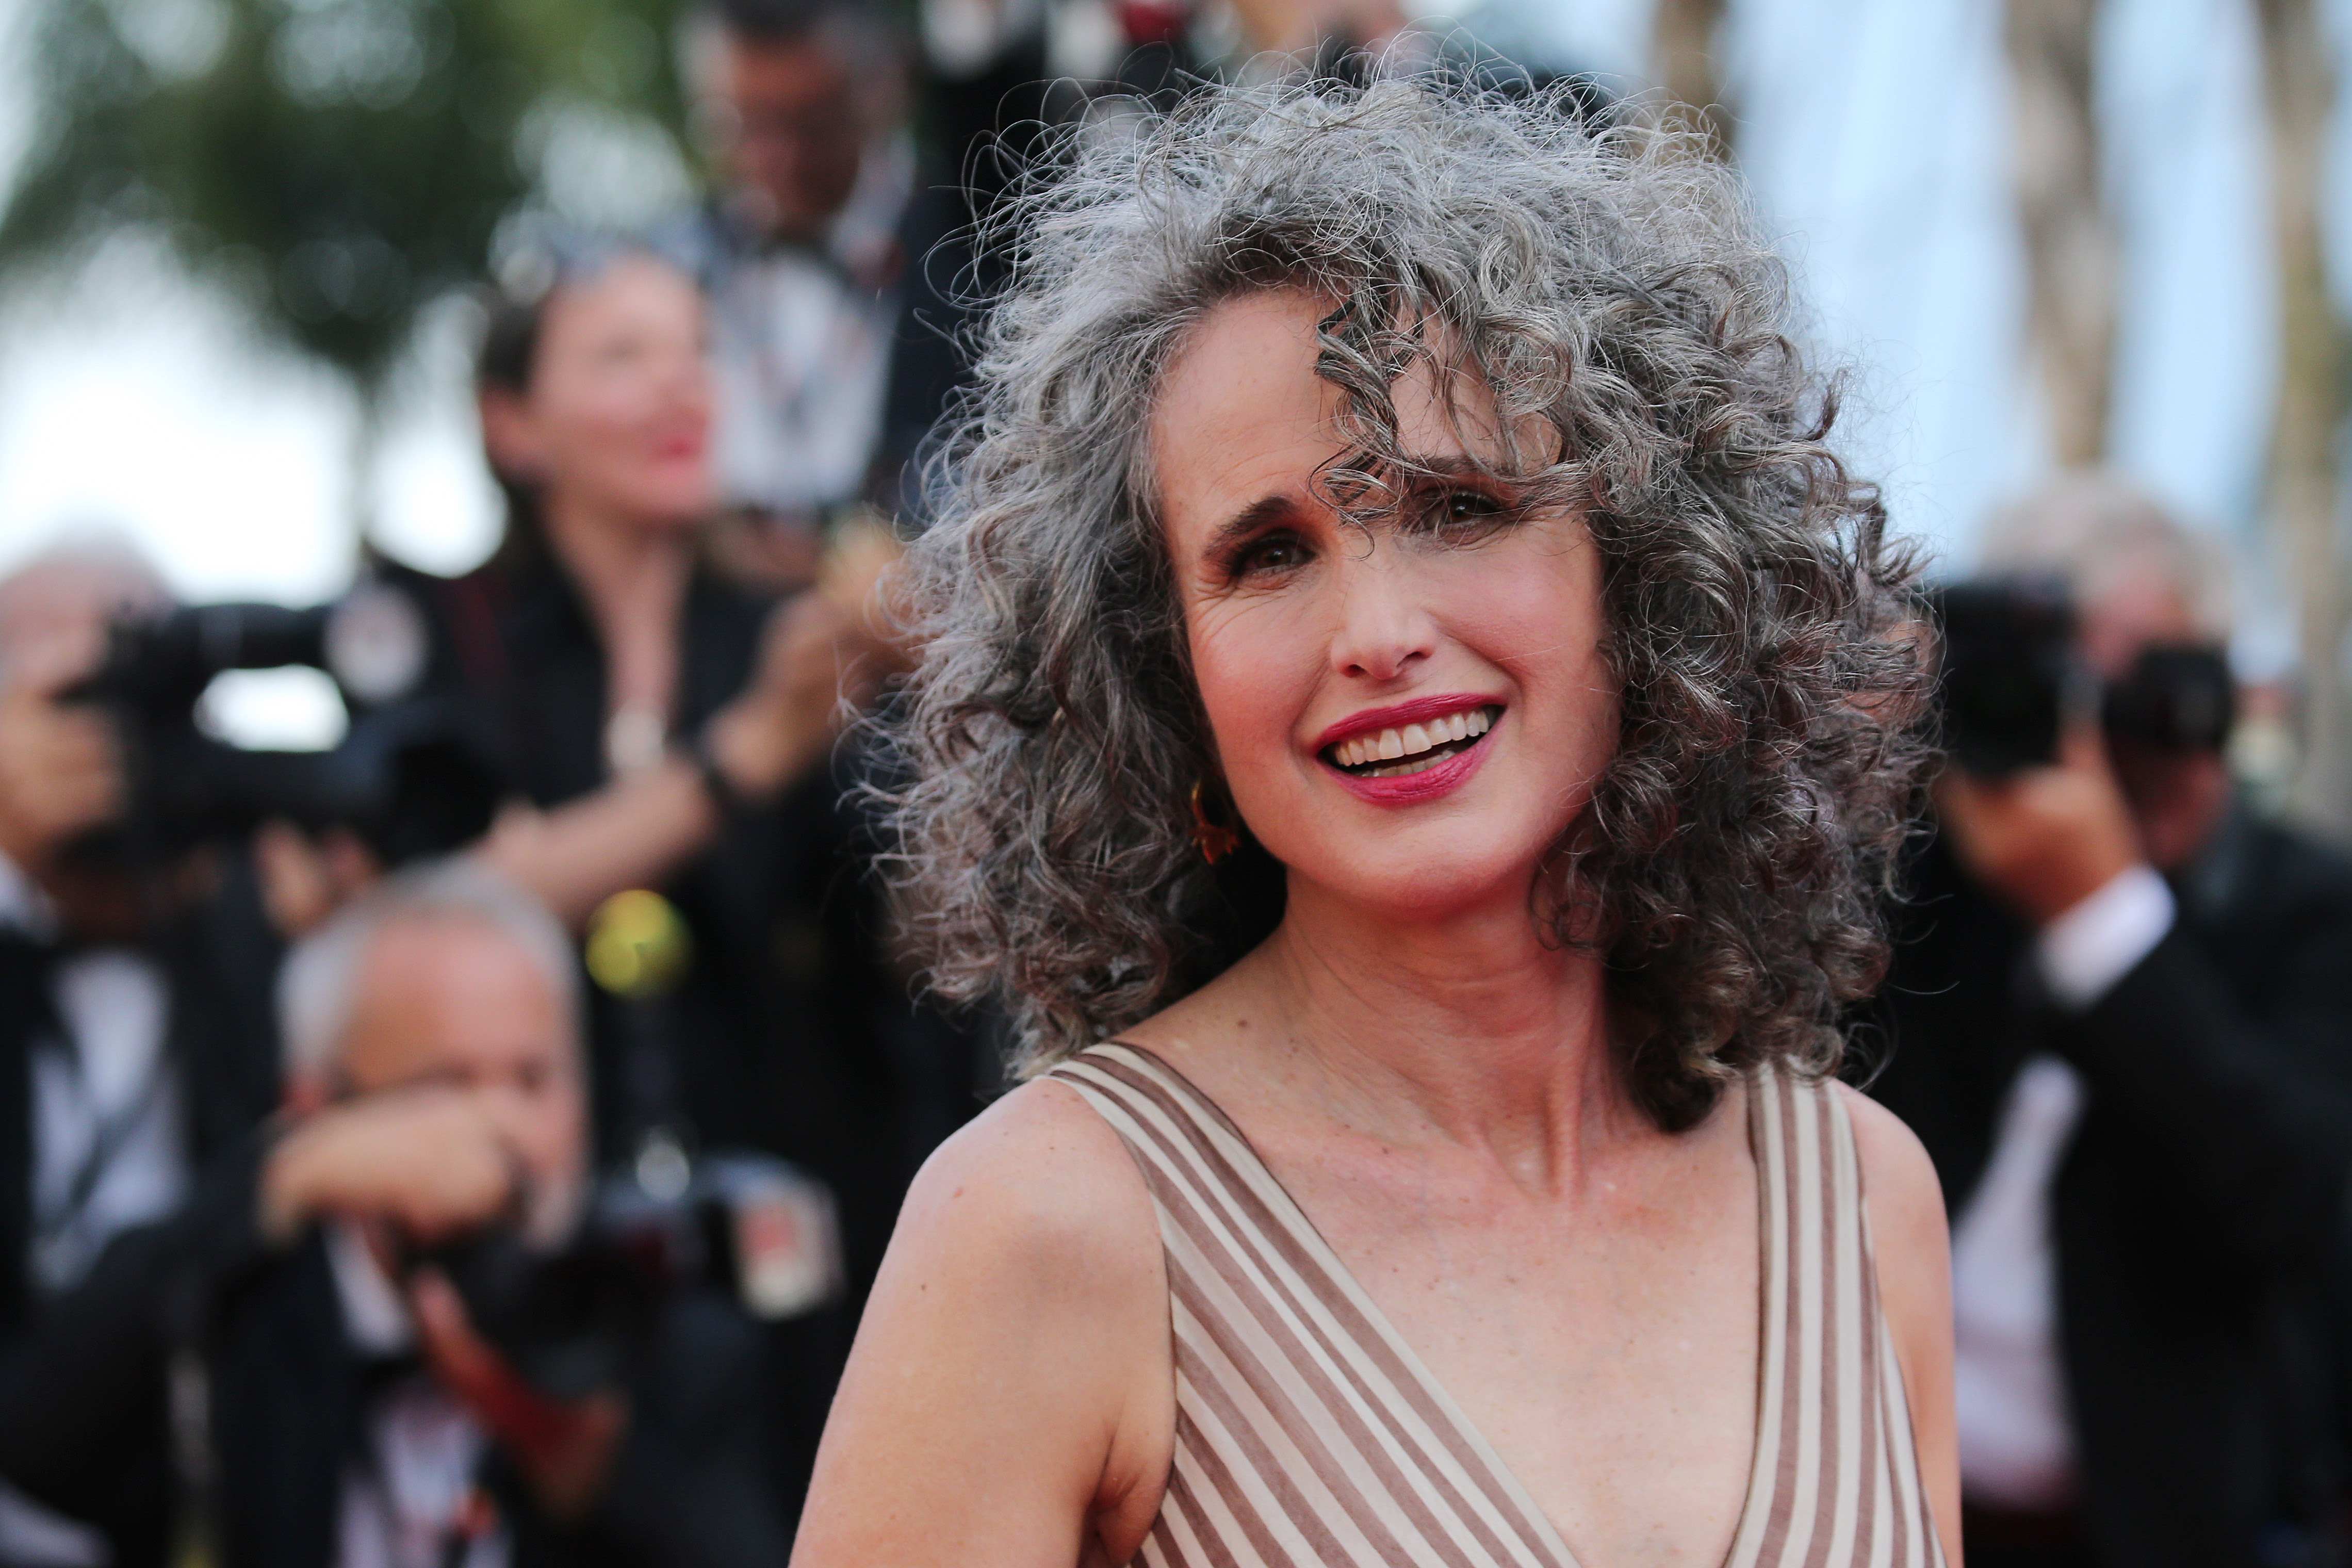 Andie MacDowell at the screening of "Mother And Son (Un Petit Frere)" during the 75th annual Cannes Film Festival on May 27, 2022, in Cannes, France | Source: Getty Images